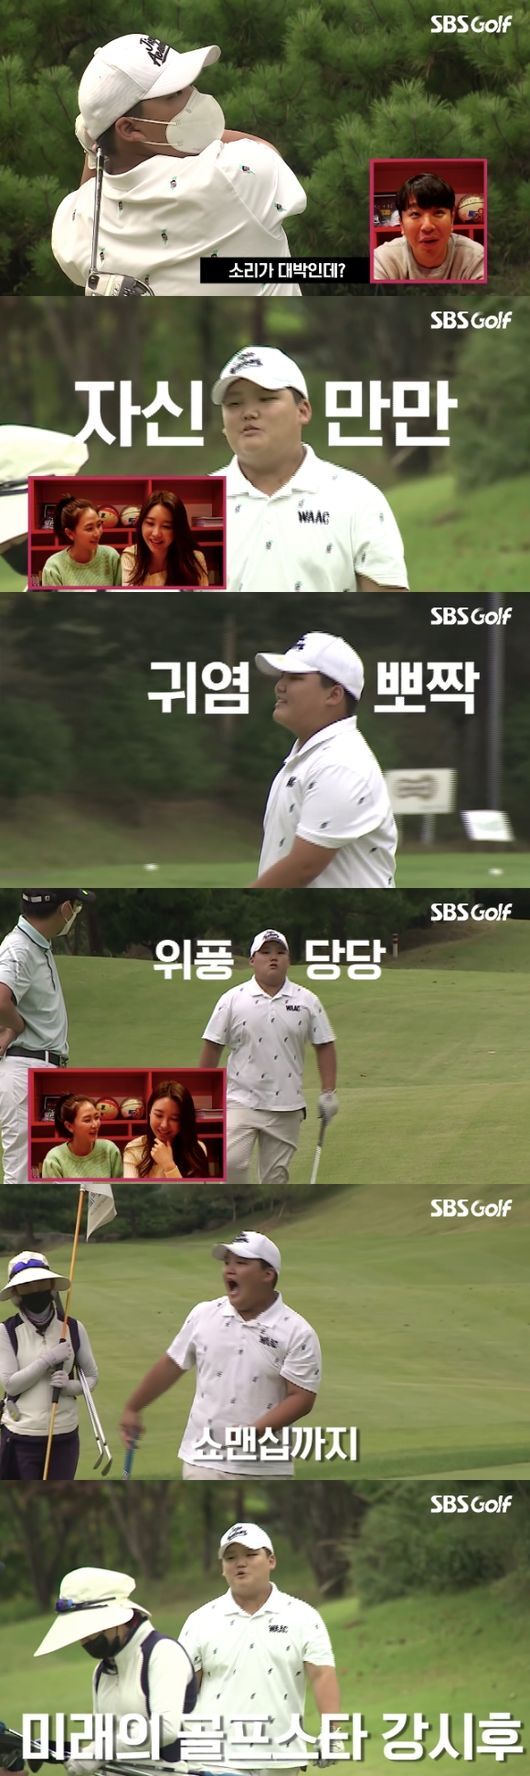 Kang Si-hu, the son of broadcaster Kang Ho-dong, showed off his amazing golf skills.On the 9th, YouTube channel SBS Golf posted a video titled The identity of an elementary school student who wants to come from PAR 4!The video shows Kang Sihoo, who participated in the Sunday Newspaper Elementary Golf Tournament last September.Shihu boasted overwhelming Fijical and DNA of extraordinary power, and focused attention from the appearance.Ahn Hyun-joon, who saw Kyonggi of Sihu County, which was cool without clogging, responded that he could not keep his mouth shut, saying, The sound is a big hit. He praised the power and accuracy of Sihu.Shin Ye-won and Lee Ji-hyun announcers also expressed surprise at the extraordinary power of elementary school students, saying that they are not only able to speak to their tremendous skills, but also the expression is confident, it is good, Im crazy, said the golf team PD.How is he so big and golf is good? He praised the ability of Shihu, who inherited Kang Ho-dongs exercise DNA, saying, I inherited my fathers gene perfectly.Sihu County has attracted attention by showing off its cute charm by showing off its outstanding golf skills such as accuracy and power as well as Kyonggi after the end of Kyonggi as if he inherited the talent of Kang Ho-dong.YouTube channel SBS Golf